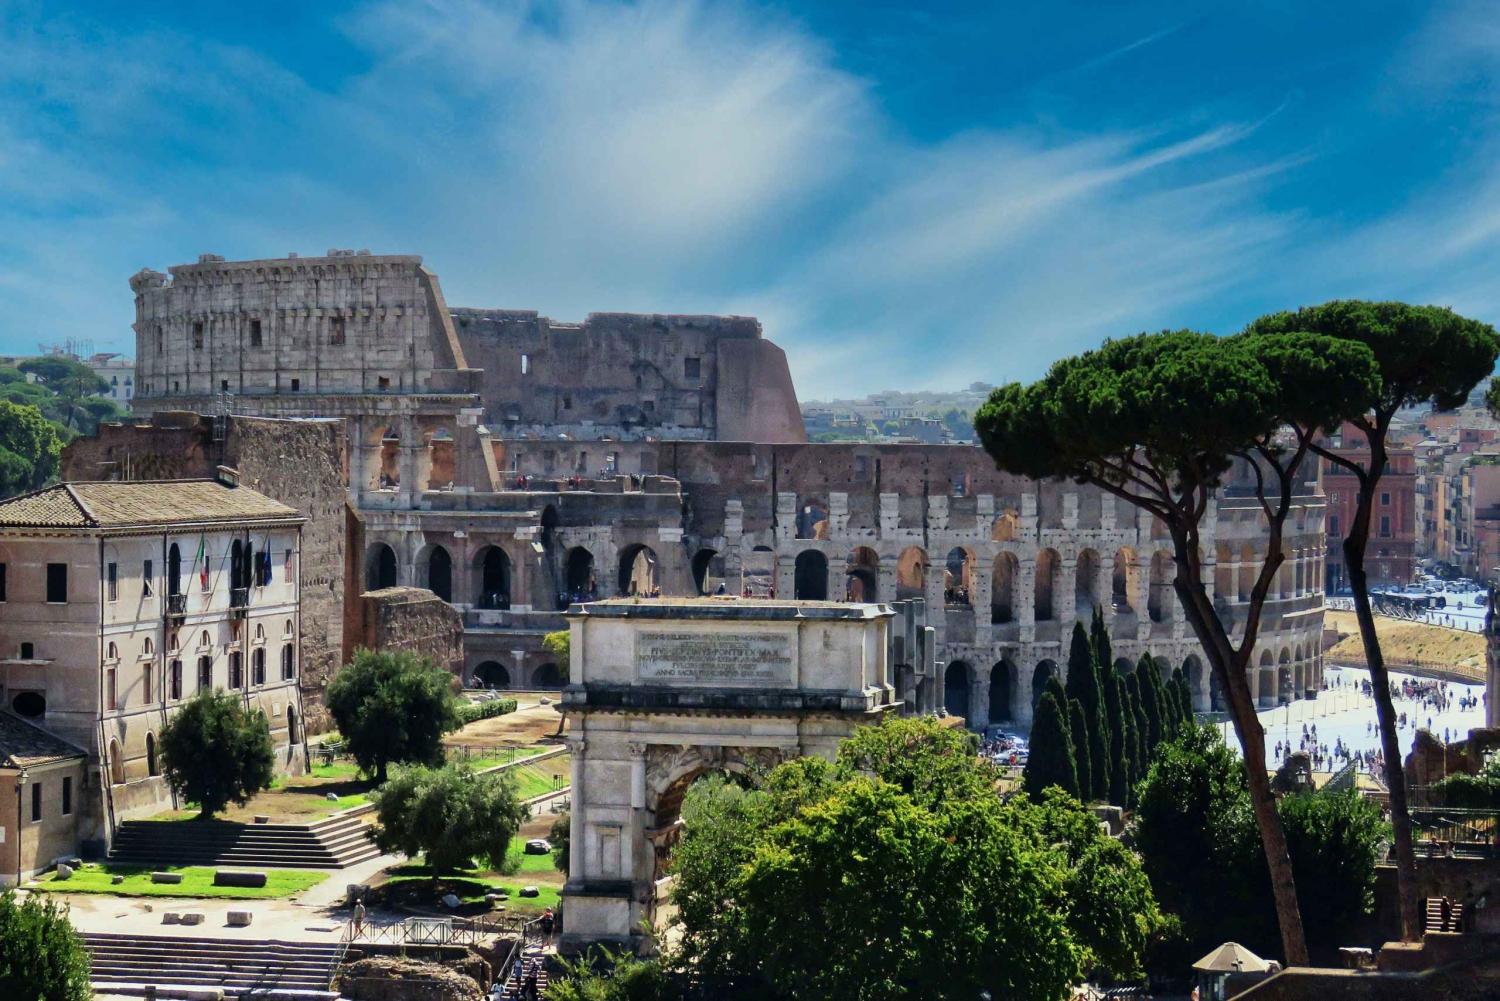 Rome: Colosseum Skip-the-Line Ticket with Audioguide App